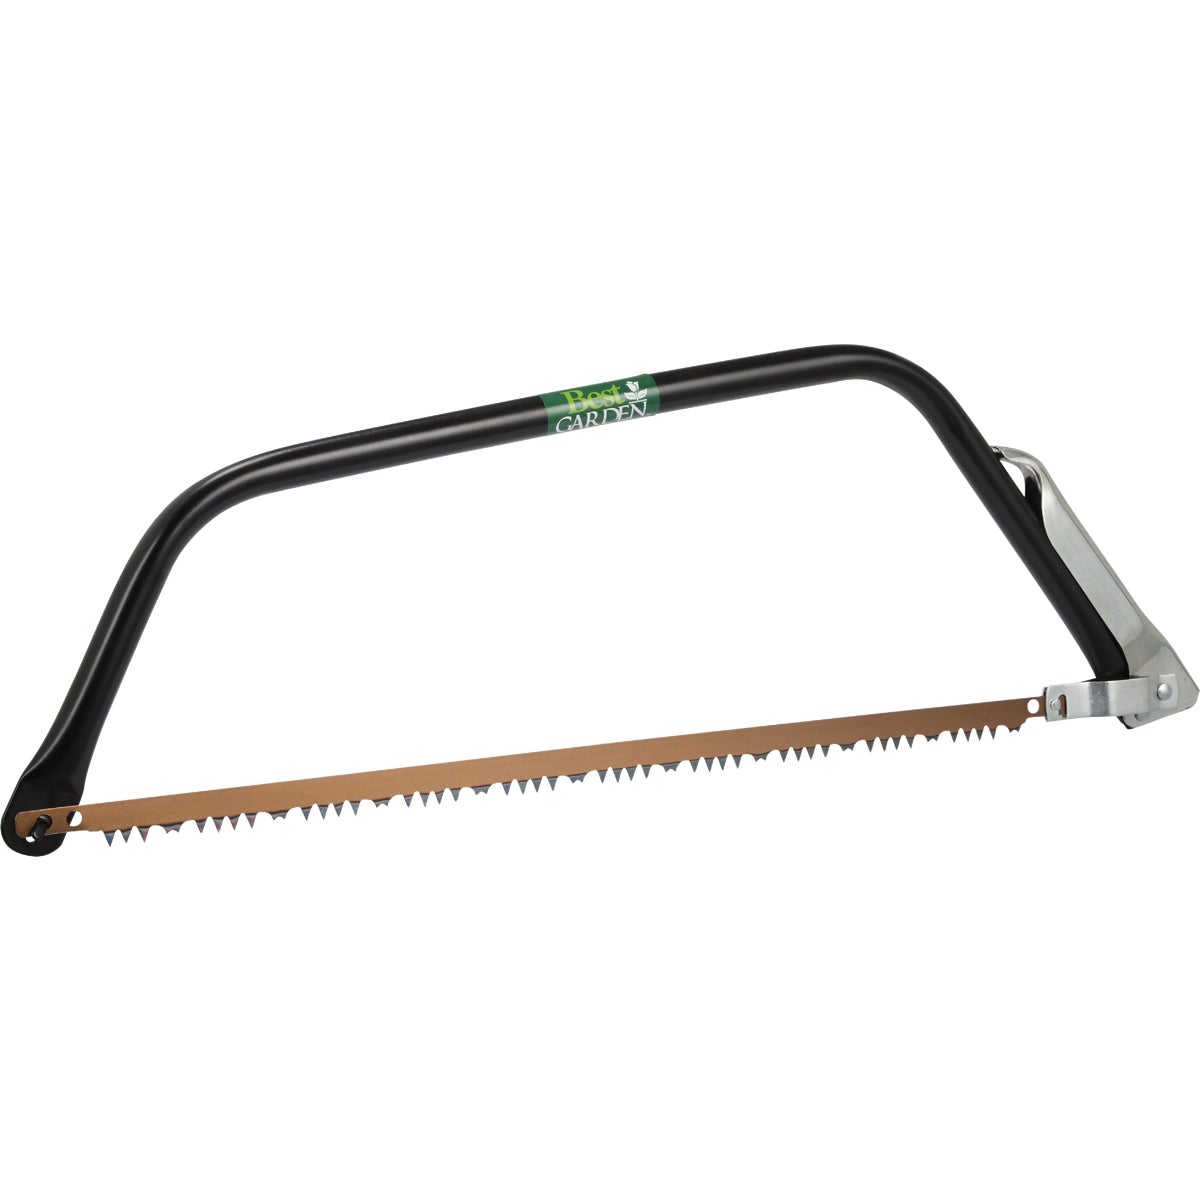 Item 723907, Ideal for pruning and landscape work around the home or garden.